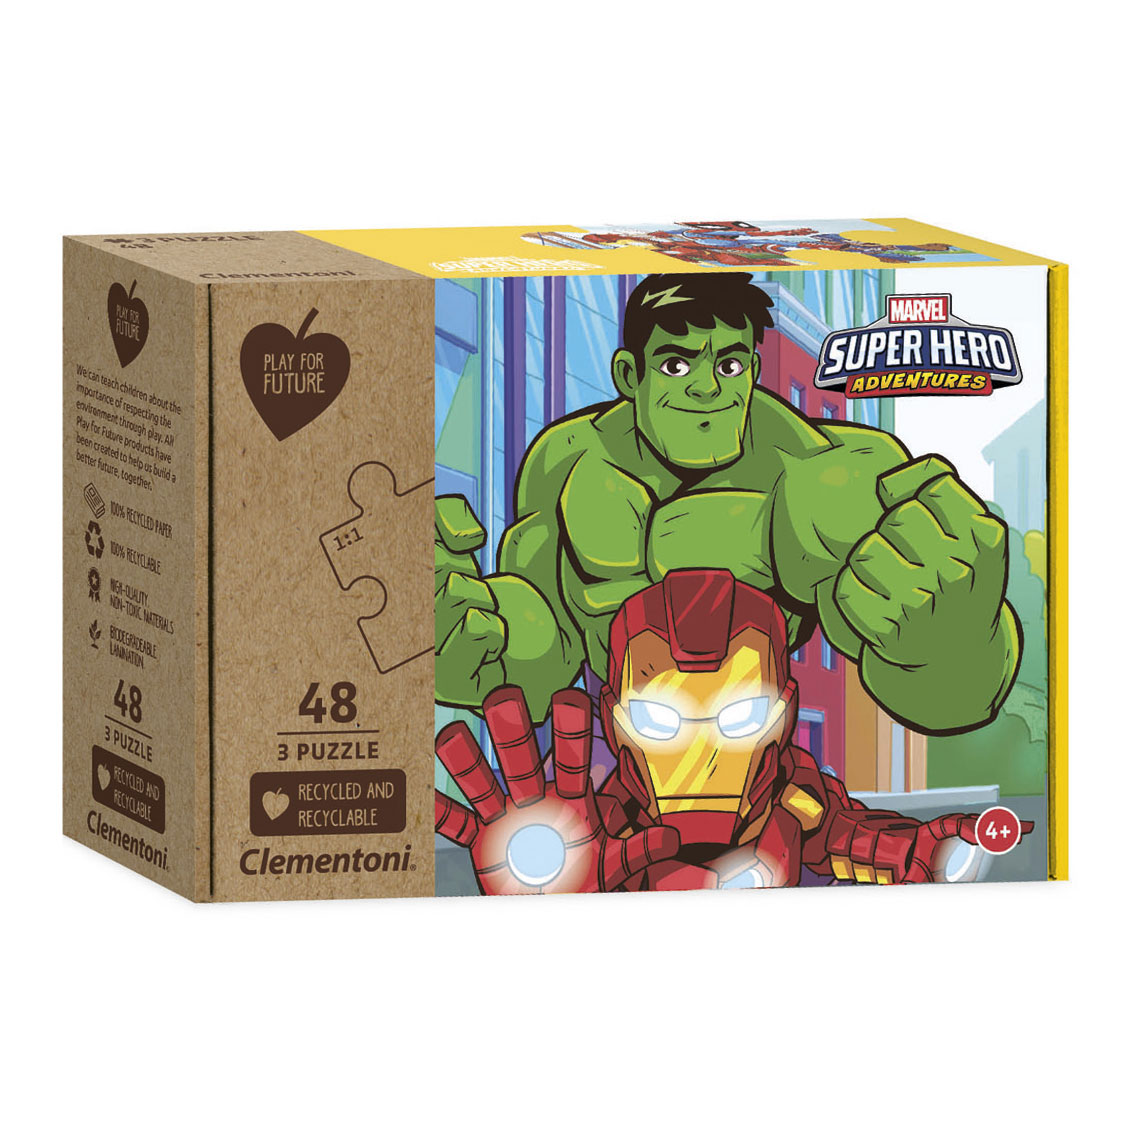 Clementoni Play for Future Puzzle - Superheroes, 3x48st.